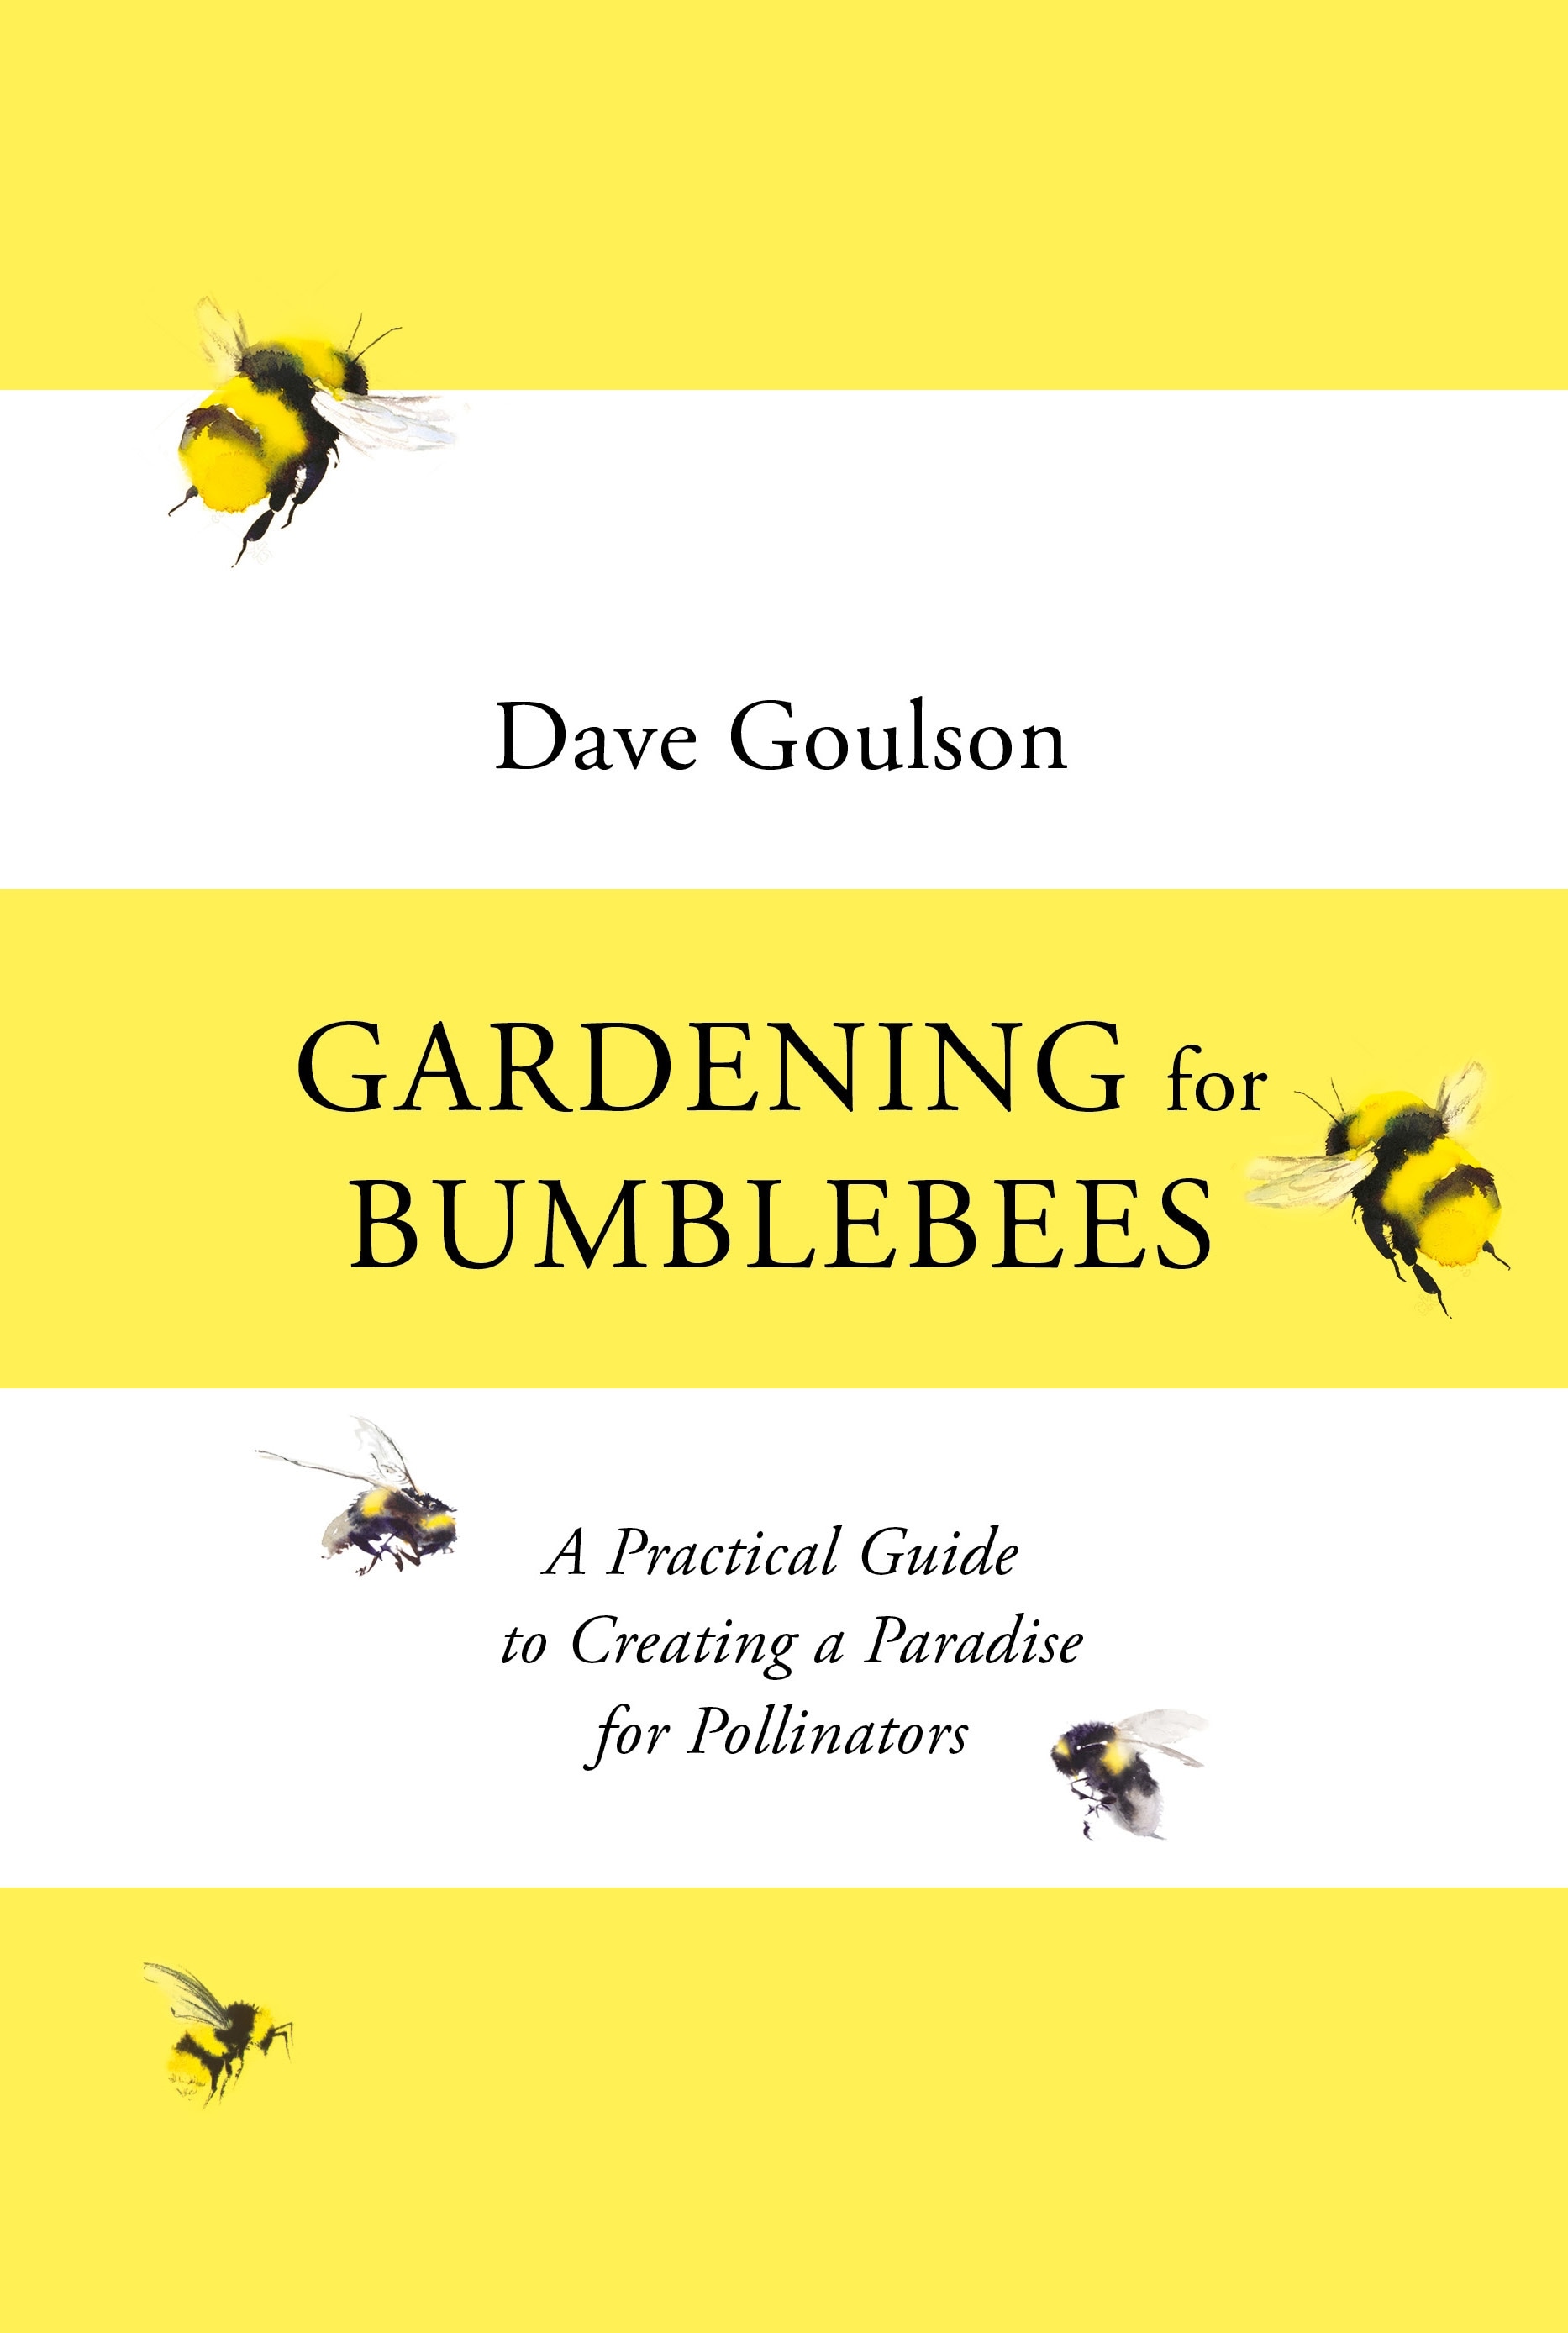 Book “Gardening for Bumblebees” by Dave Goulson — April 1, 2021